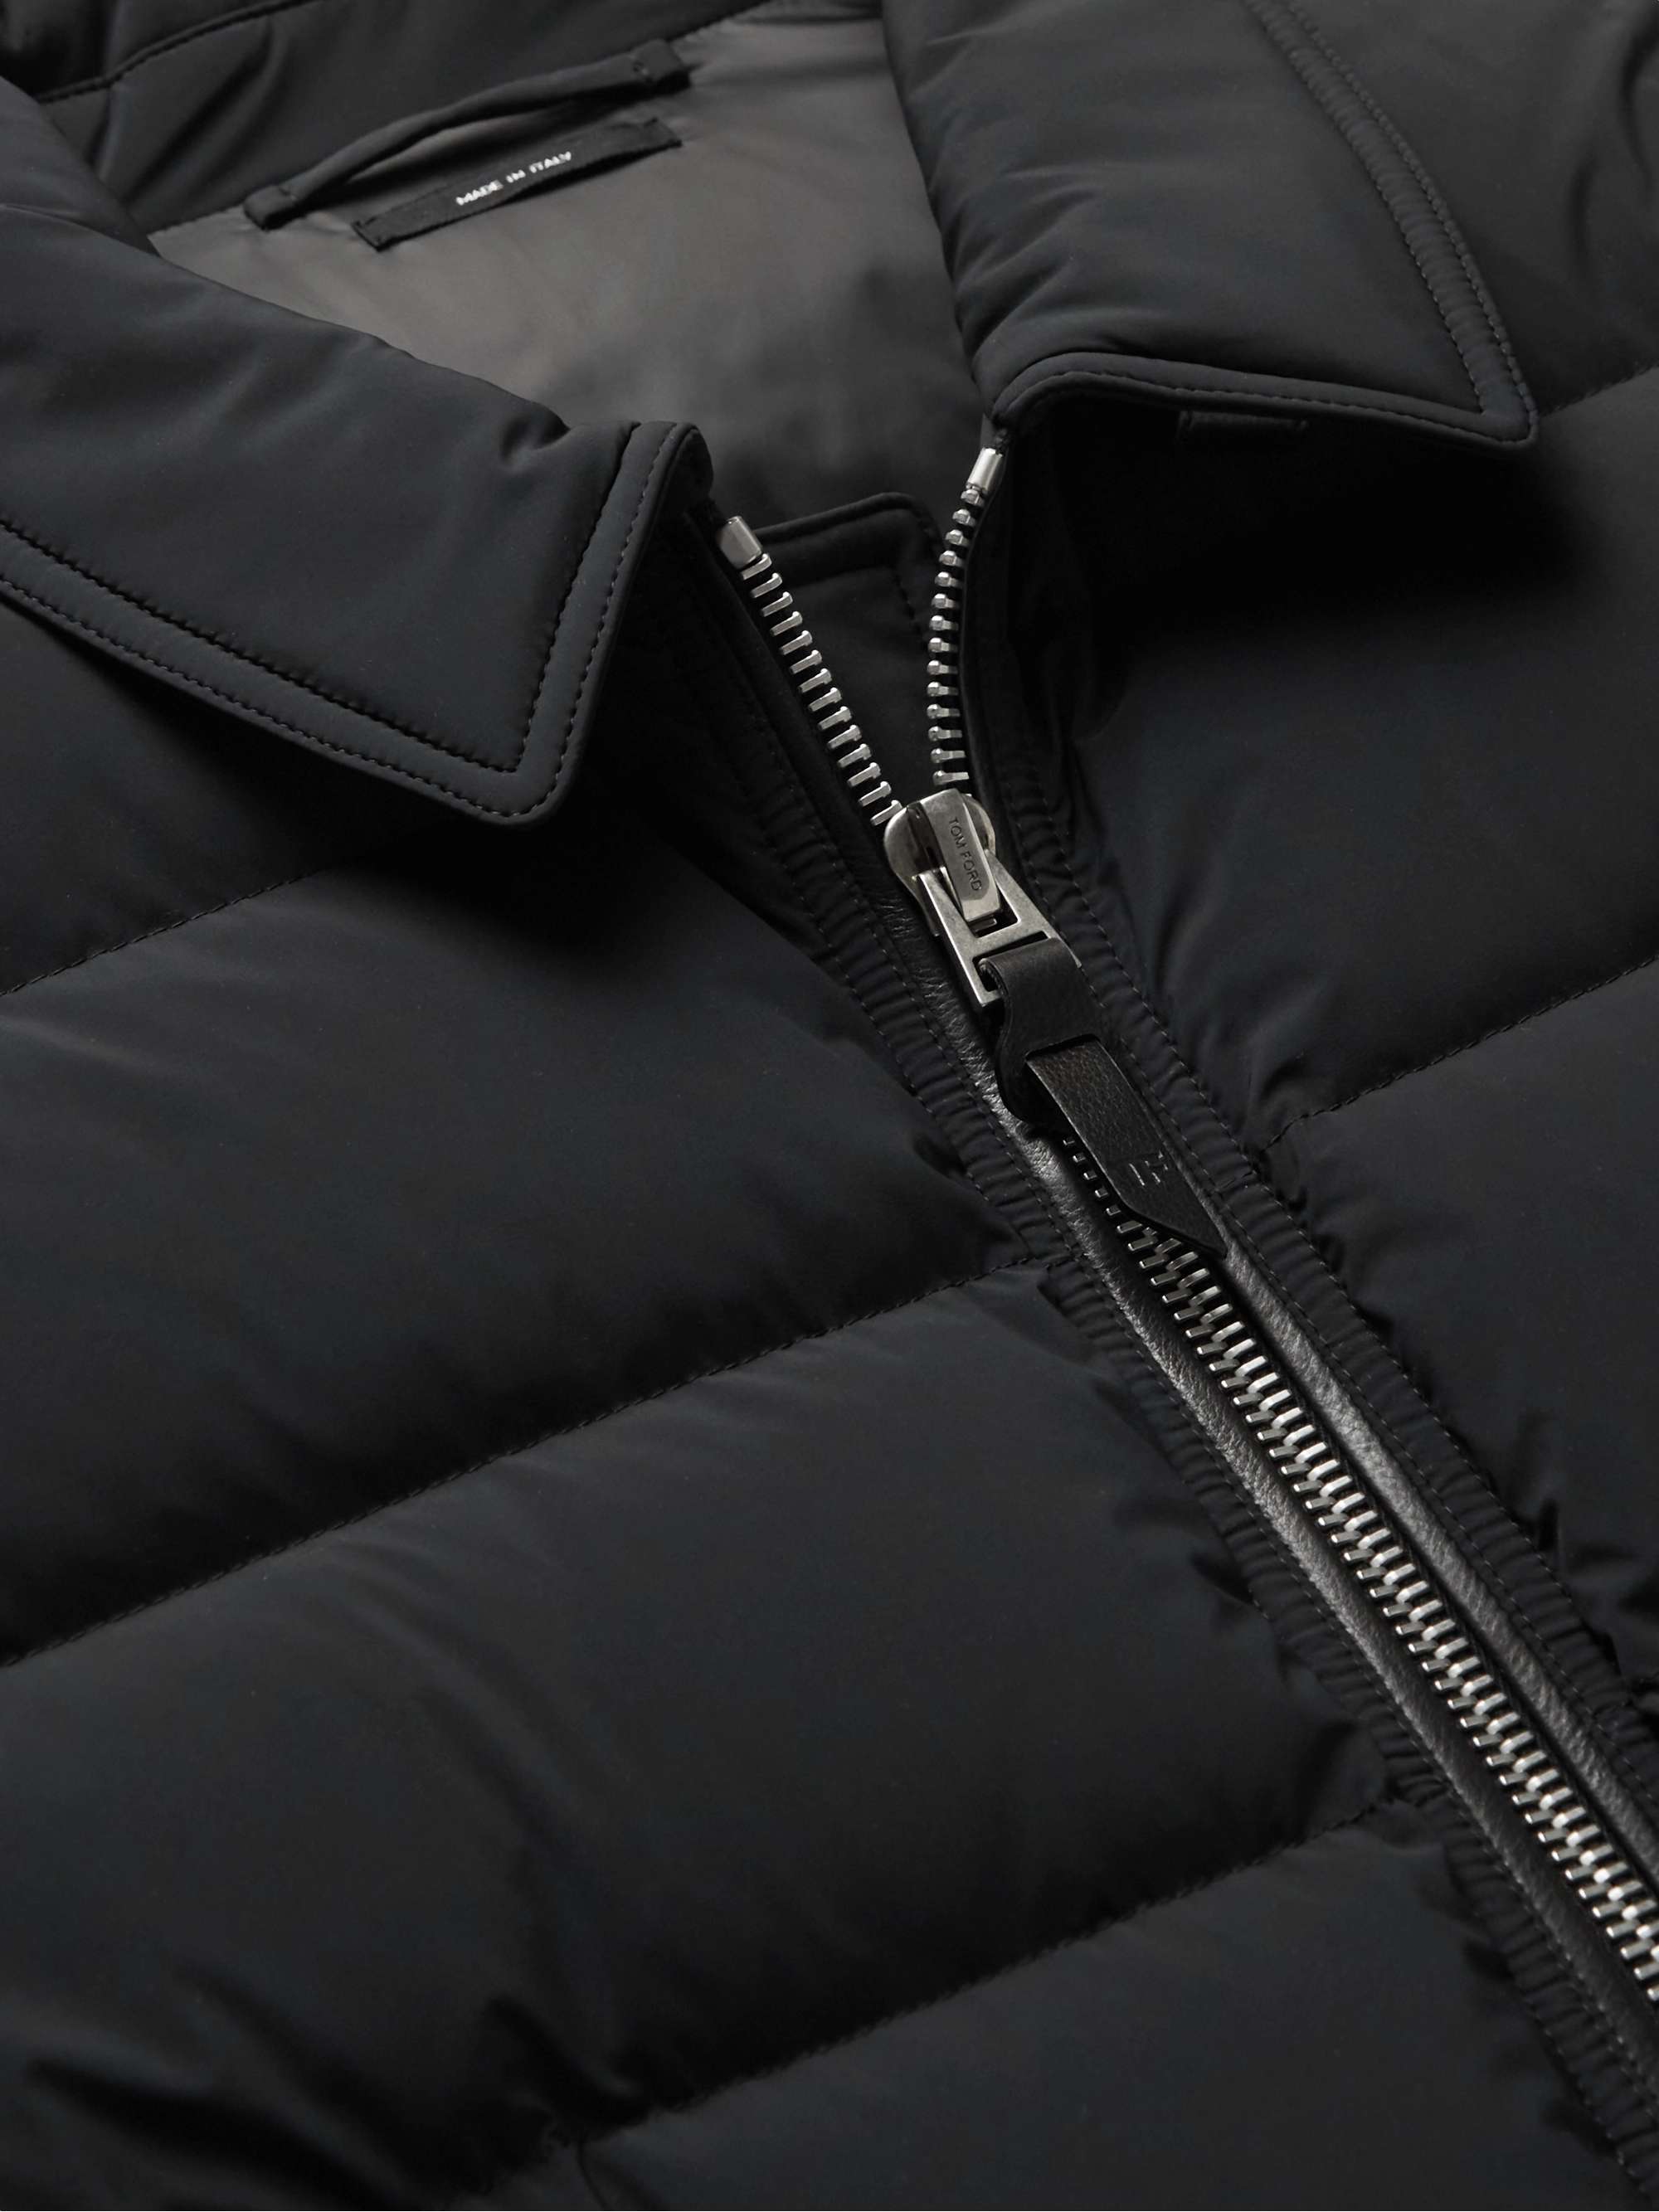 TOM FORD Slim-Fit Leather-Trimmed Quilted Shell Down Jacket